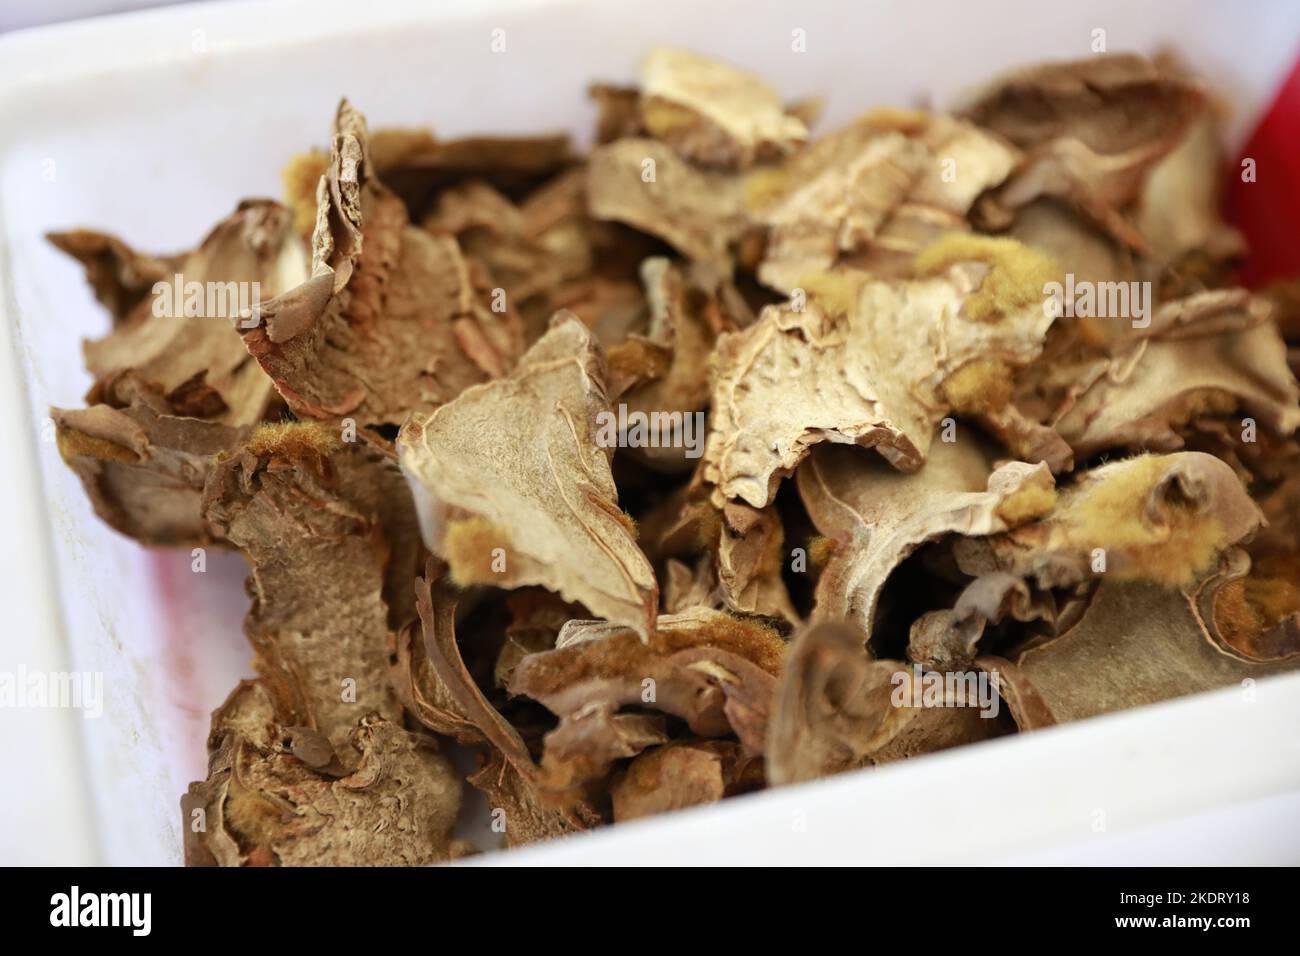 Golden retriever dog ridge is a kind of traditional Chinese medicinal materials Stock Photo